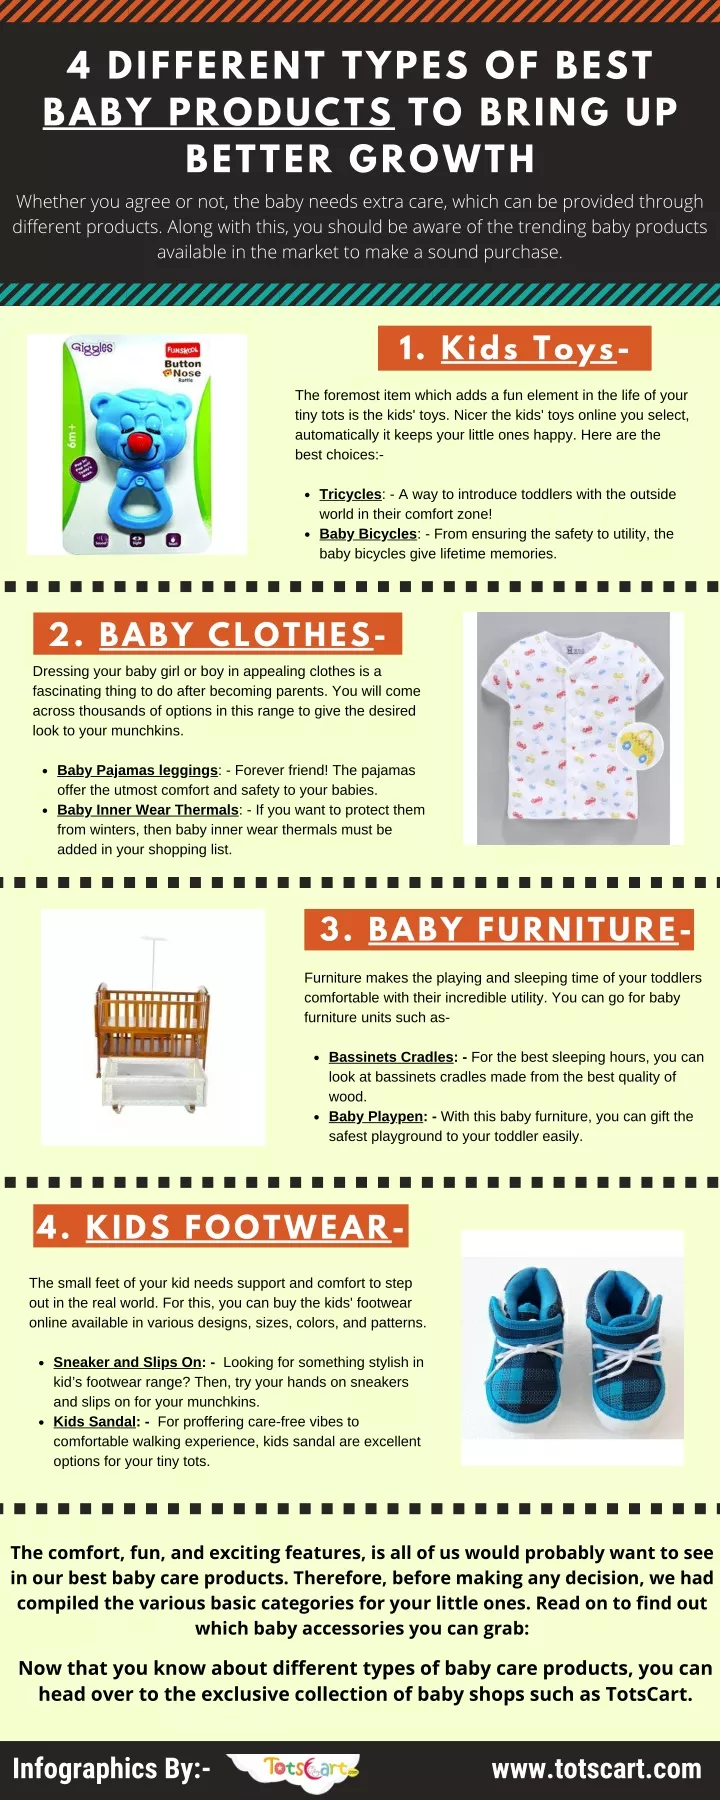 4 different types of best baby products to bring